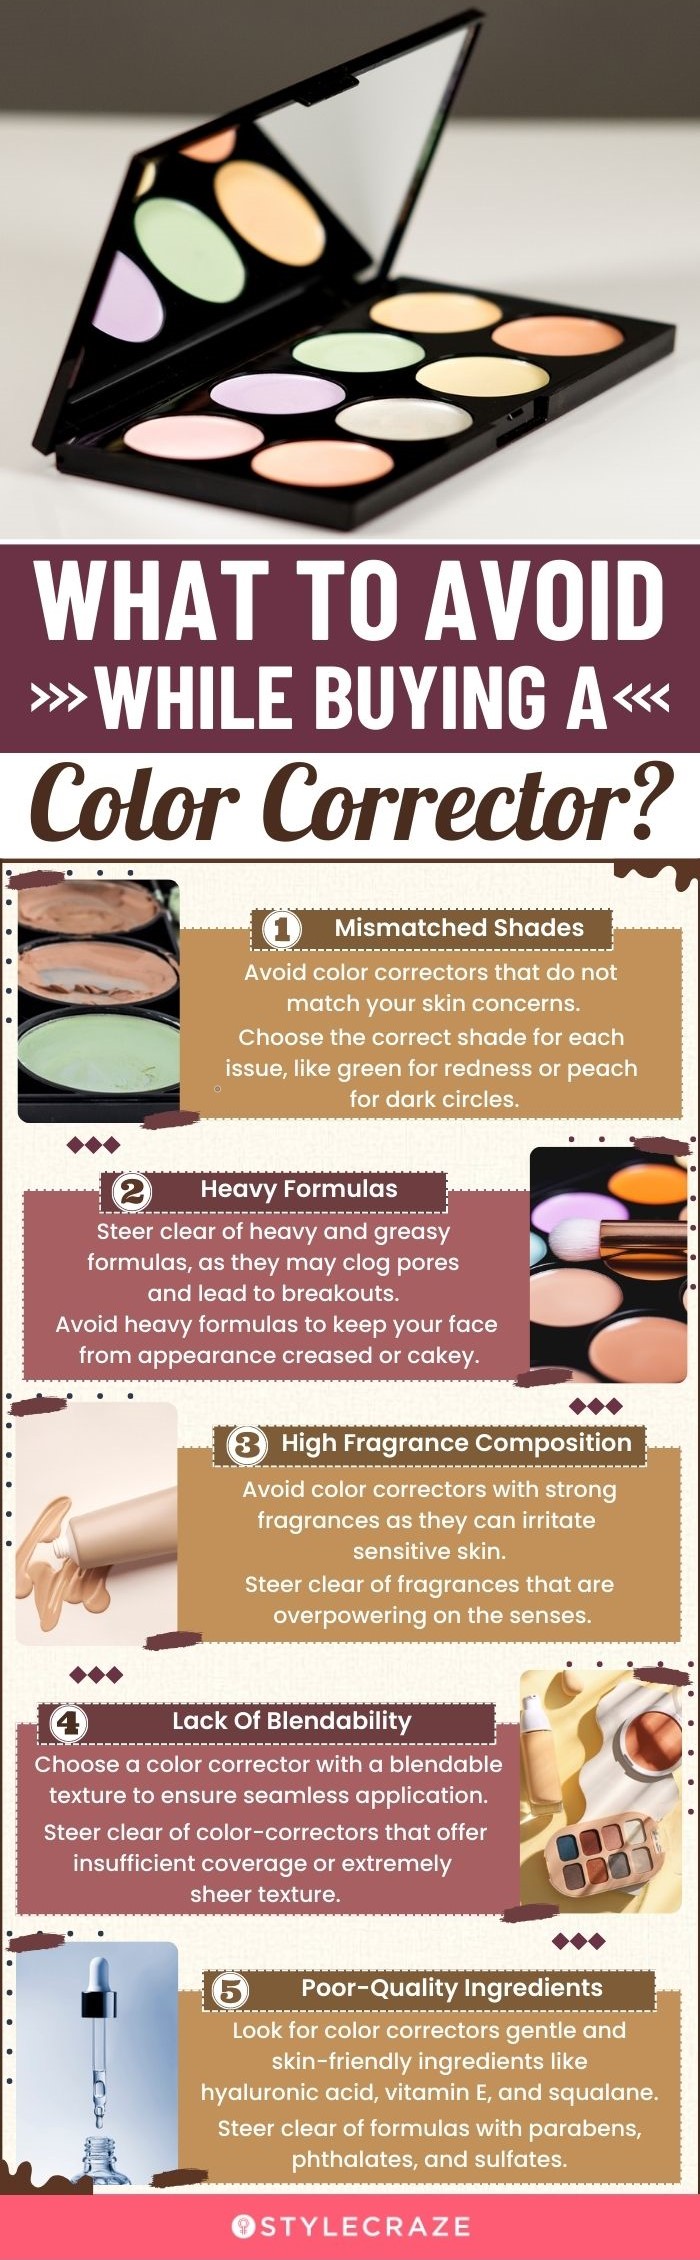 What To Avoid While Buying A Color Corrector? (infographic)